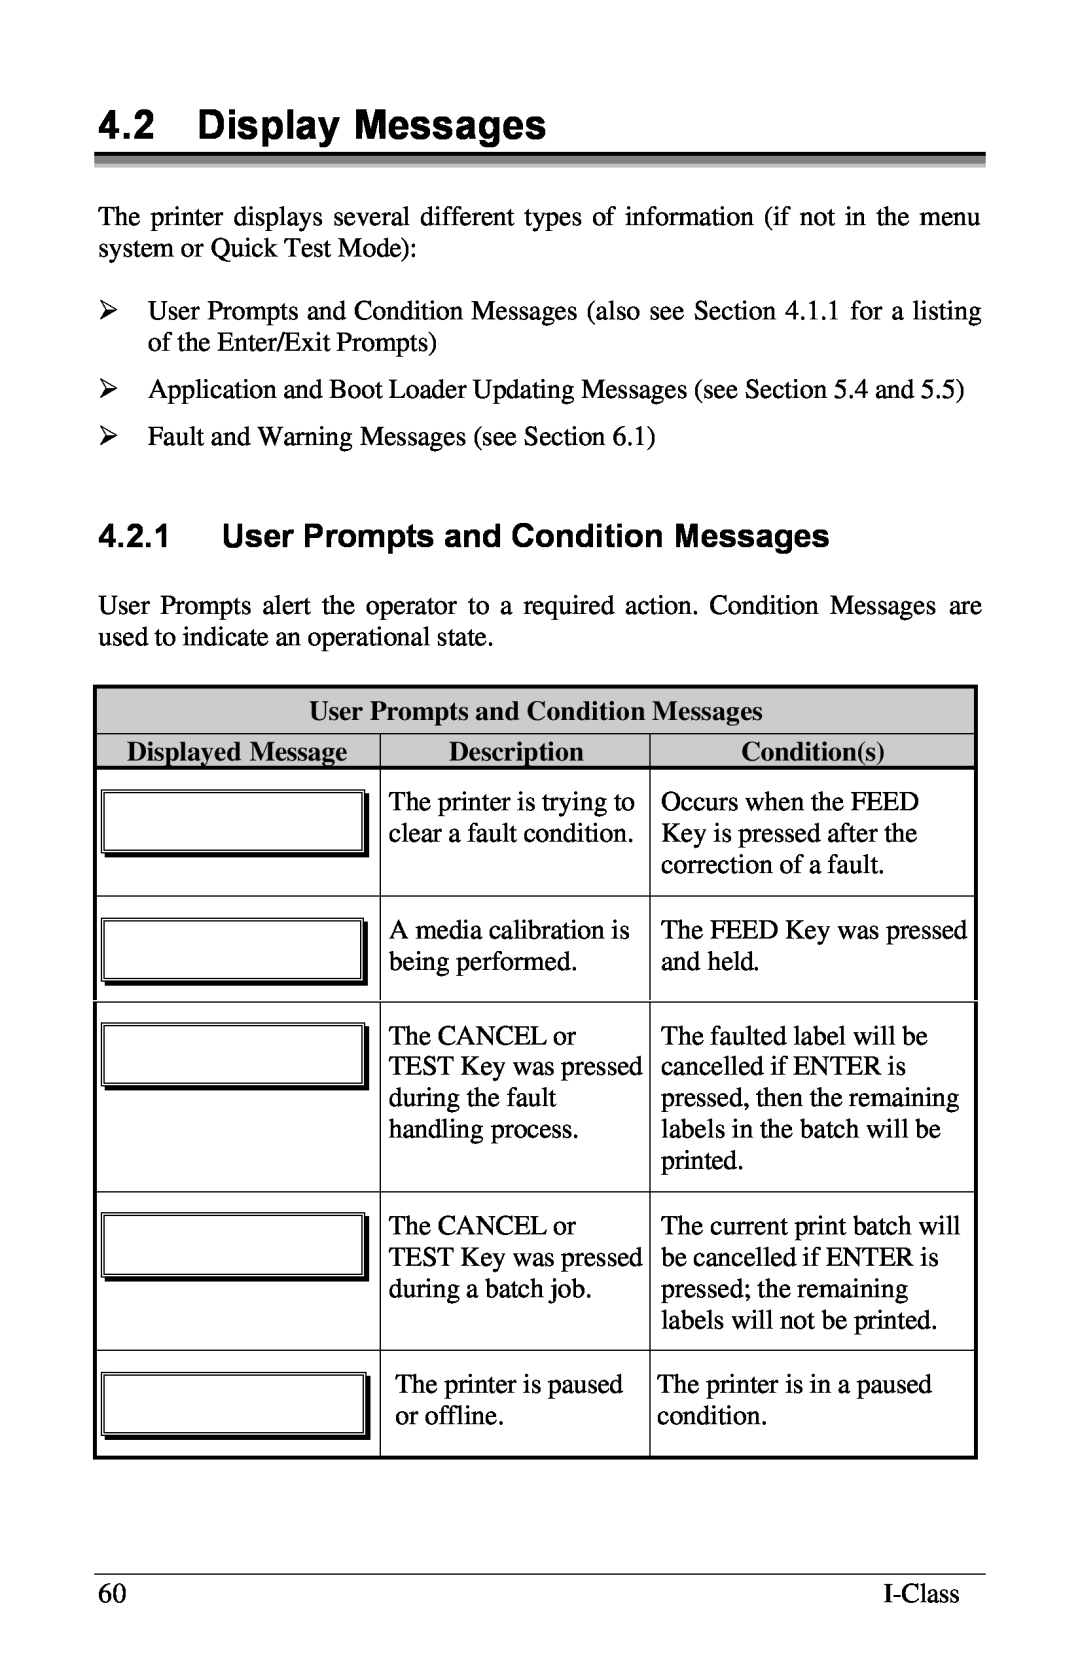 Xerox I Class 4.2Display Messages, 4.2.1User Prompts and Condition Messages, Displayed Message, Description, Conditions 